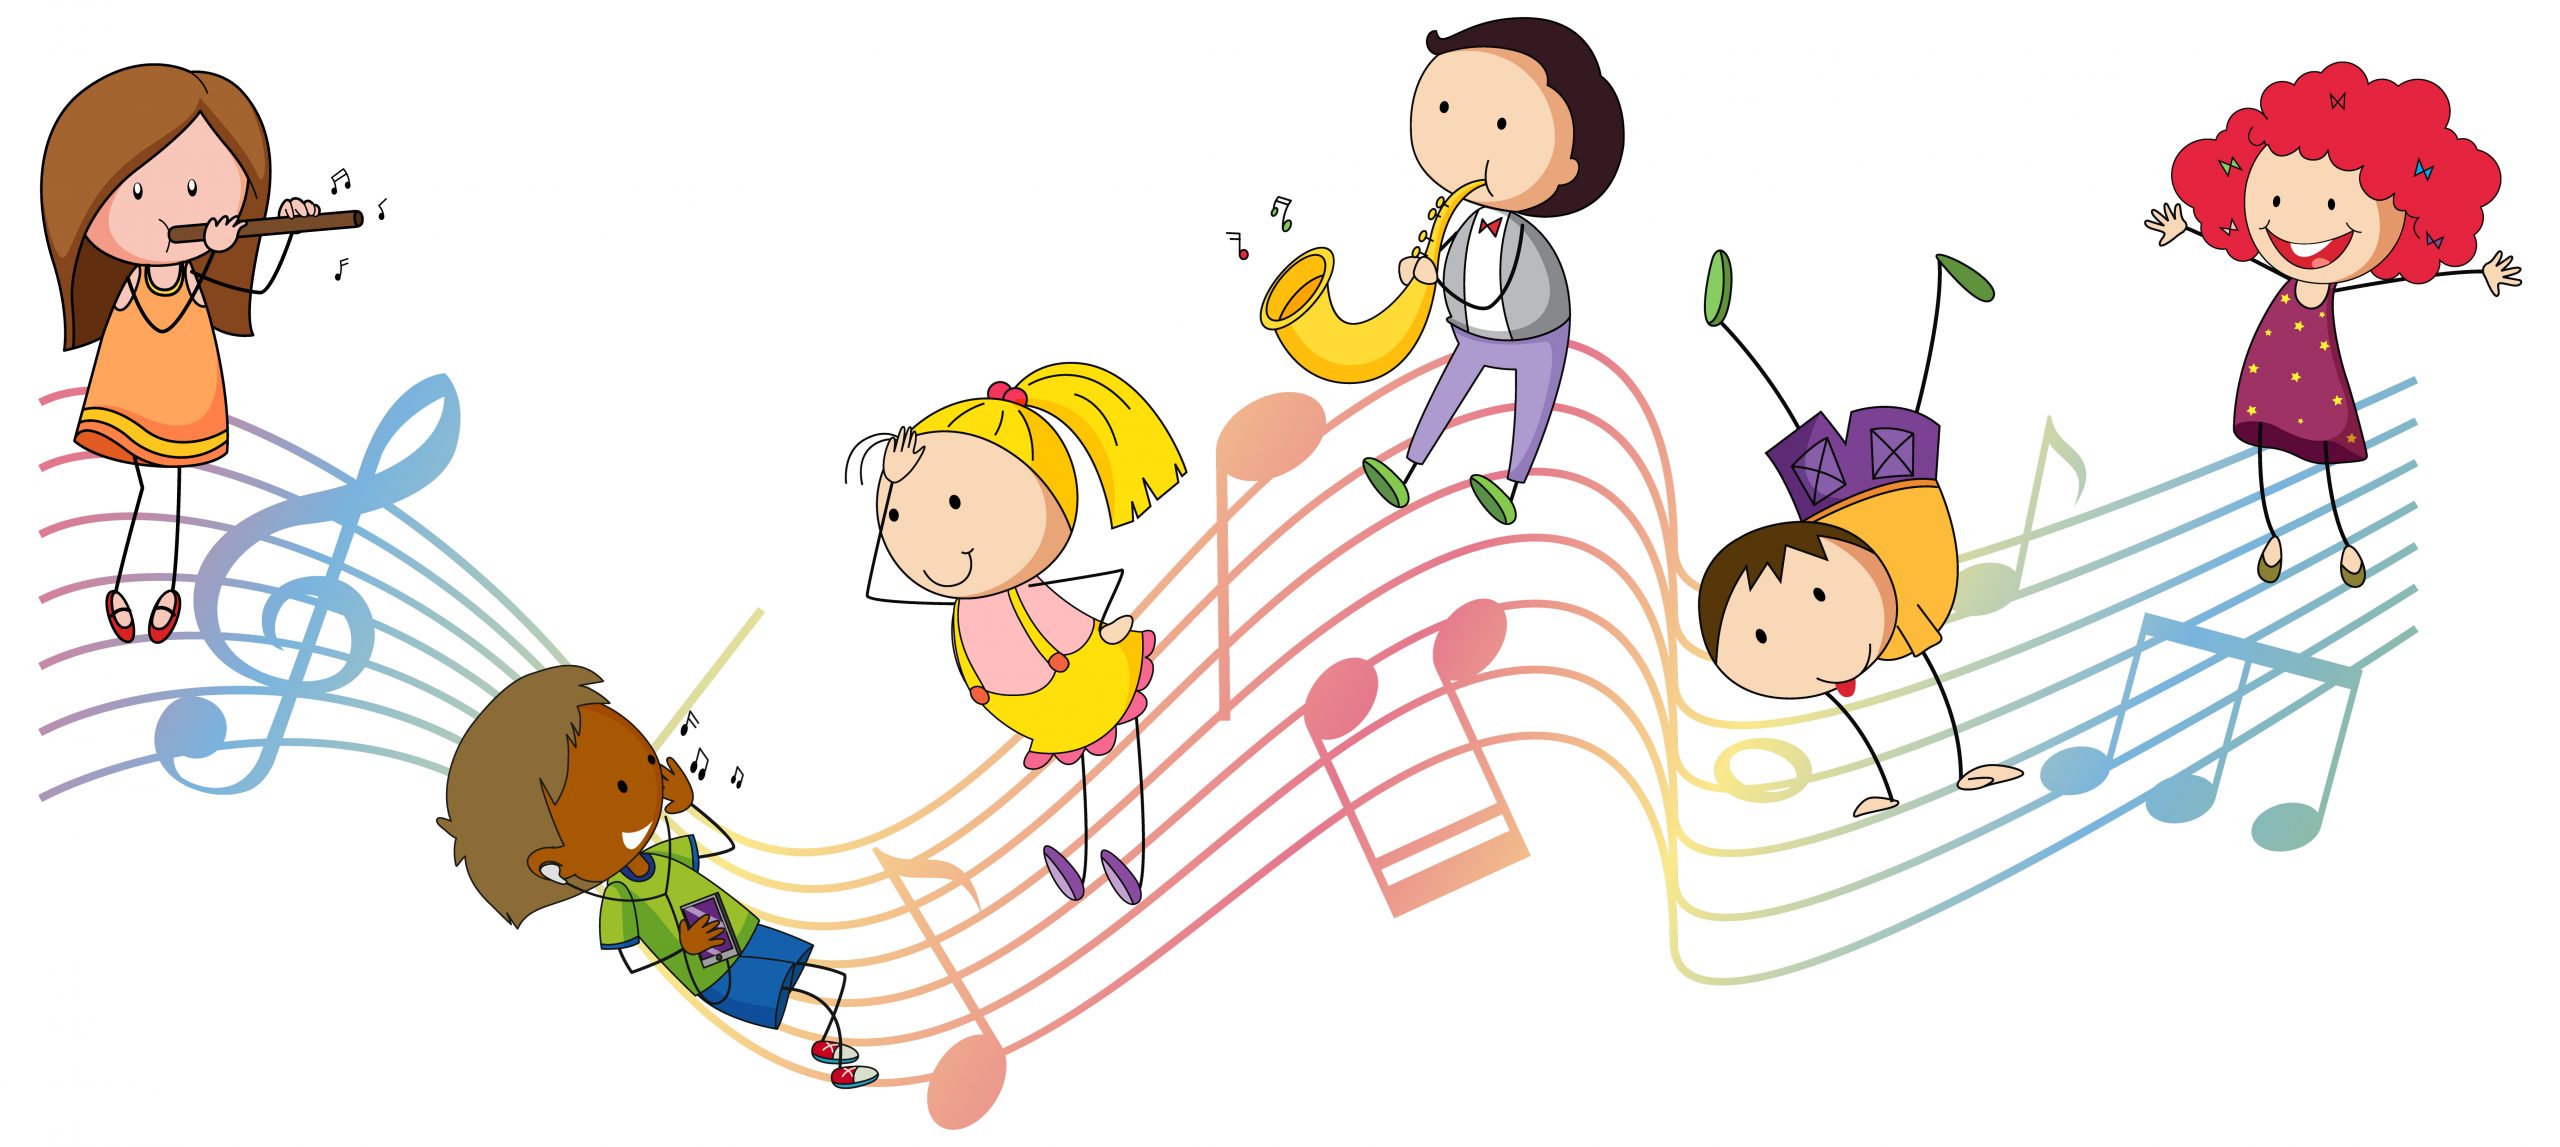 Musical melody symbols with many doodle kids cartoon character illustration